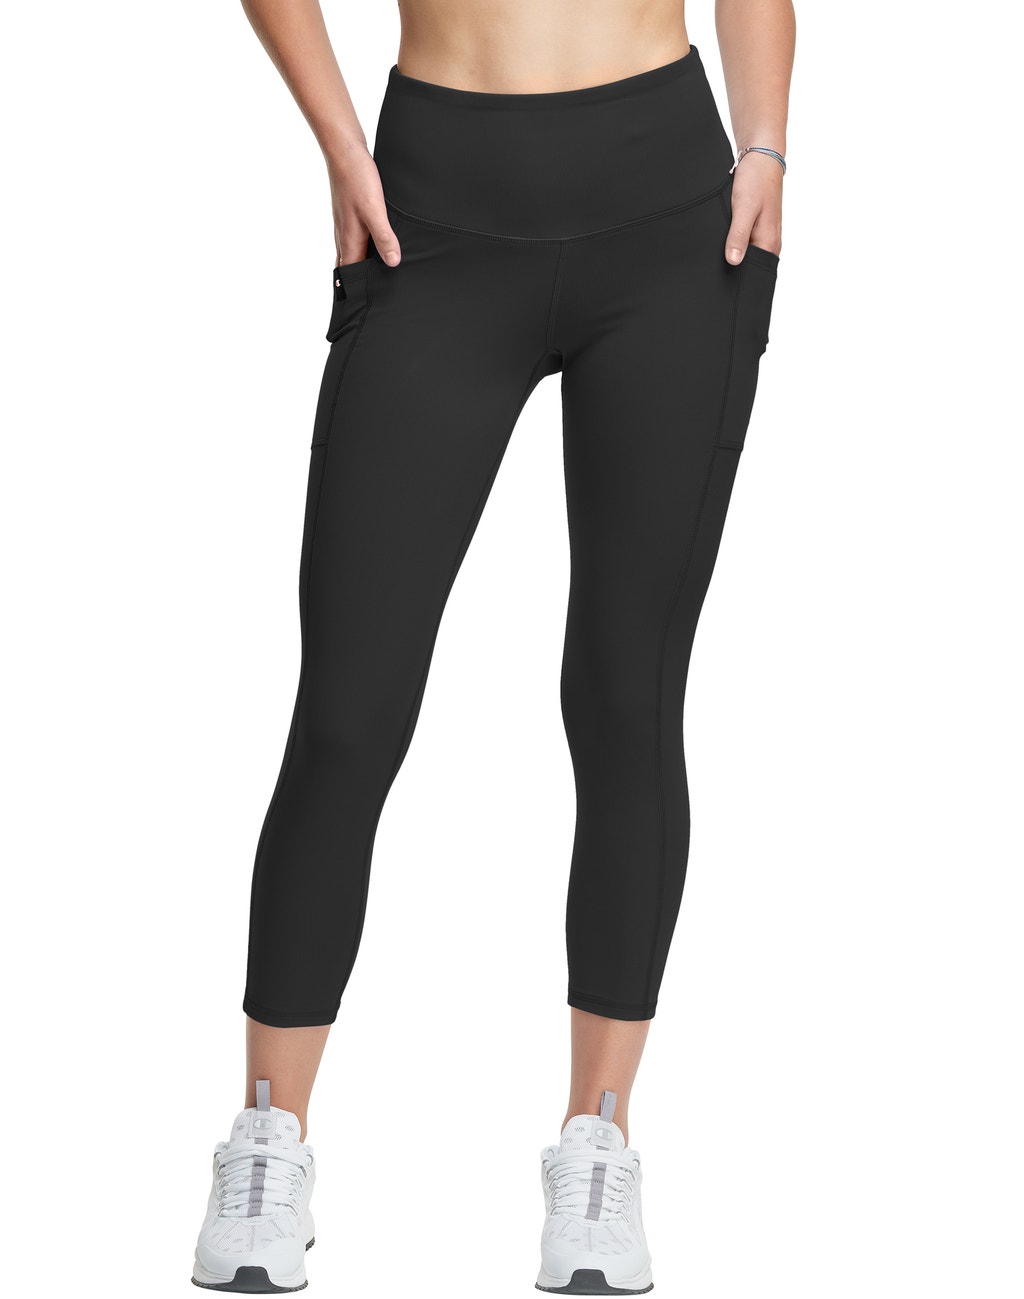 C9 Champion High-Waist Cropped Athletic Pant